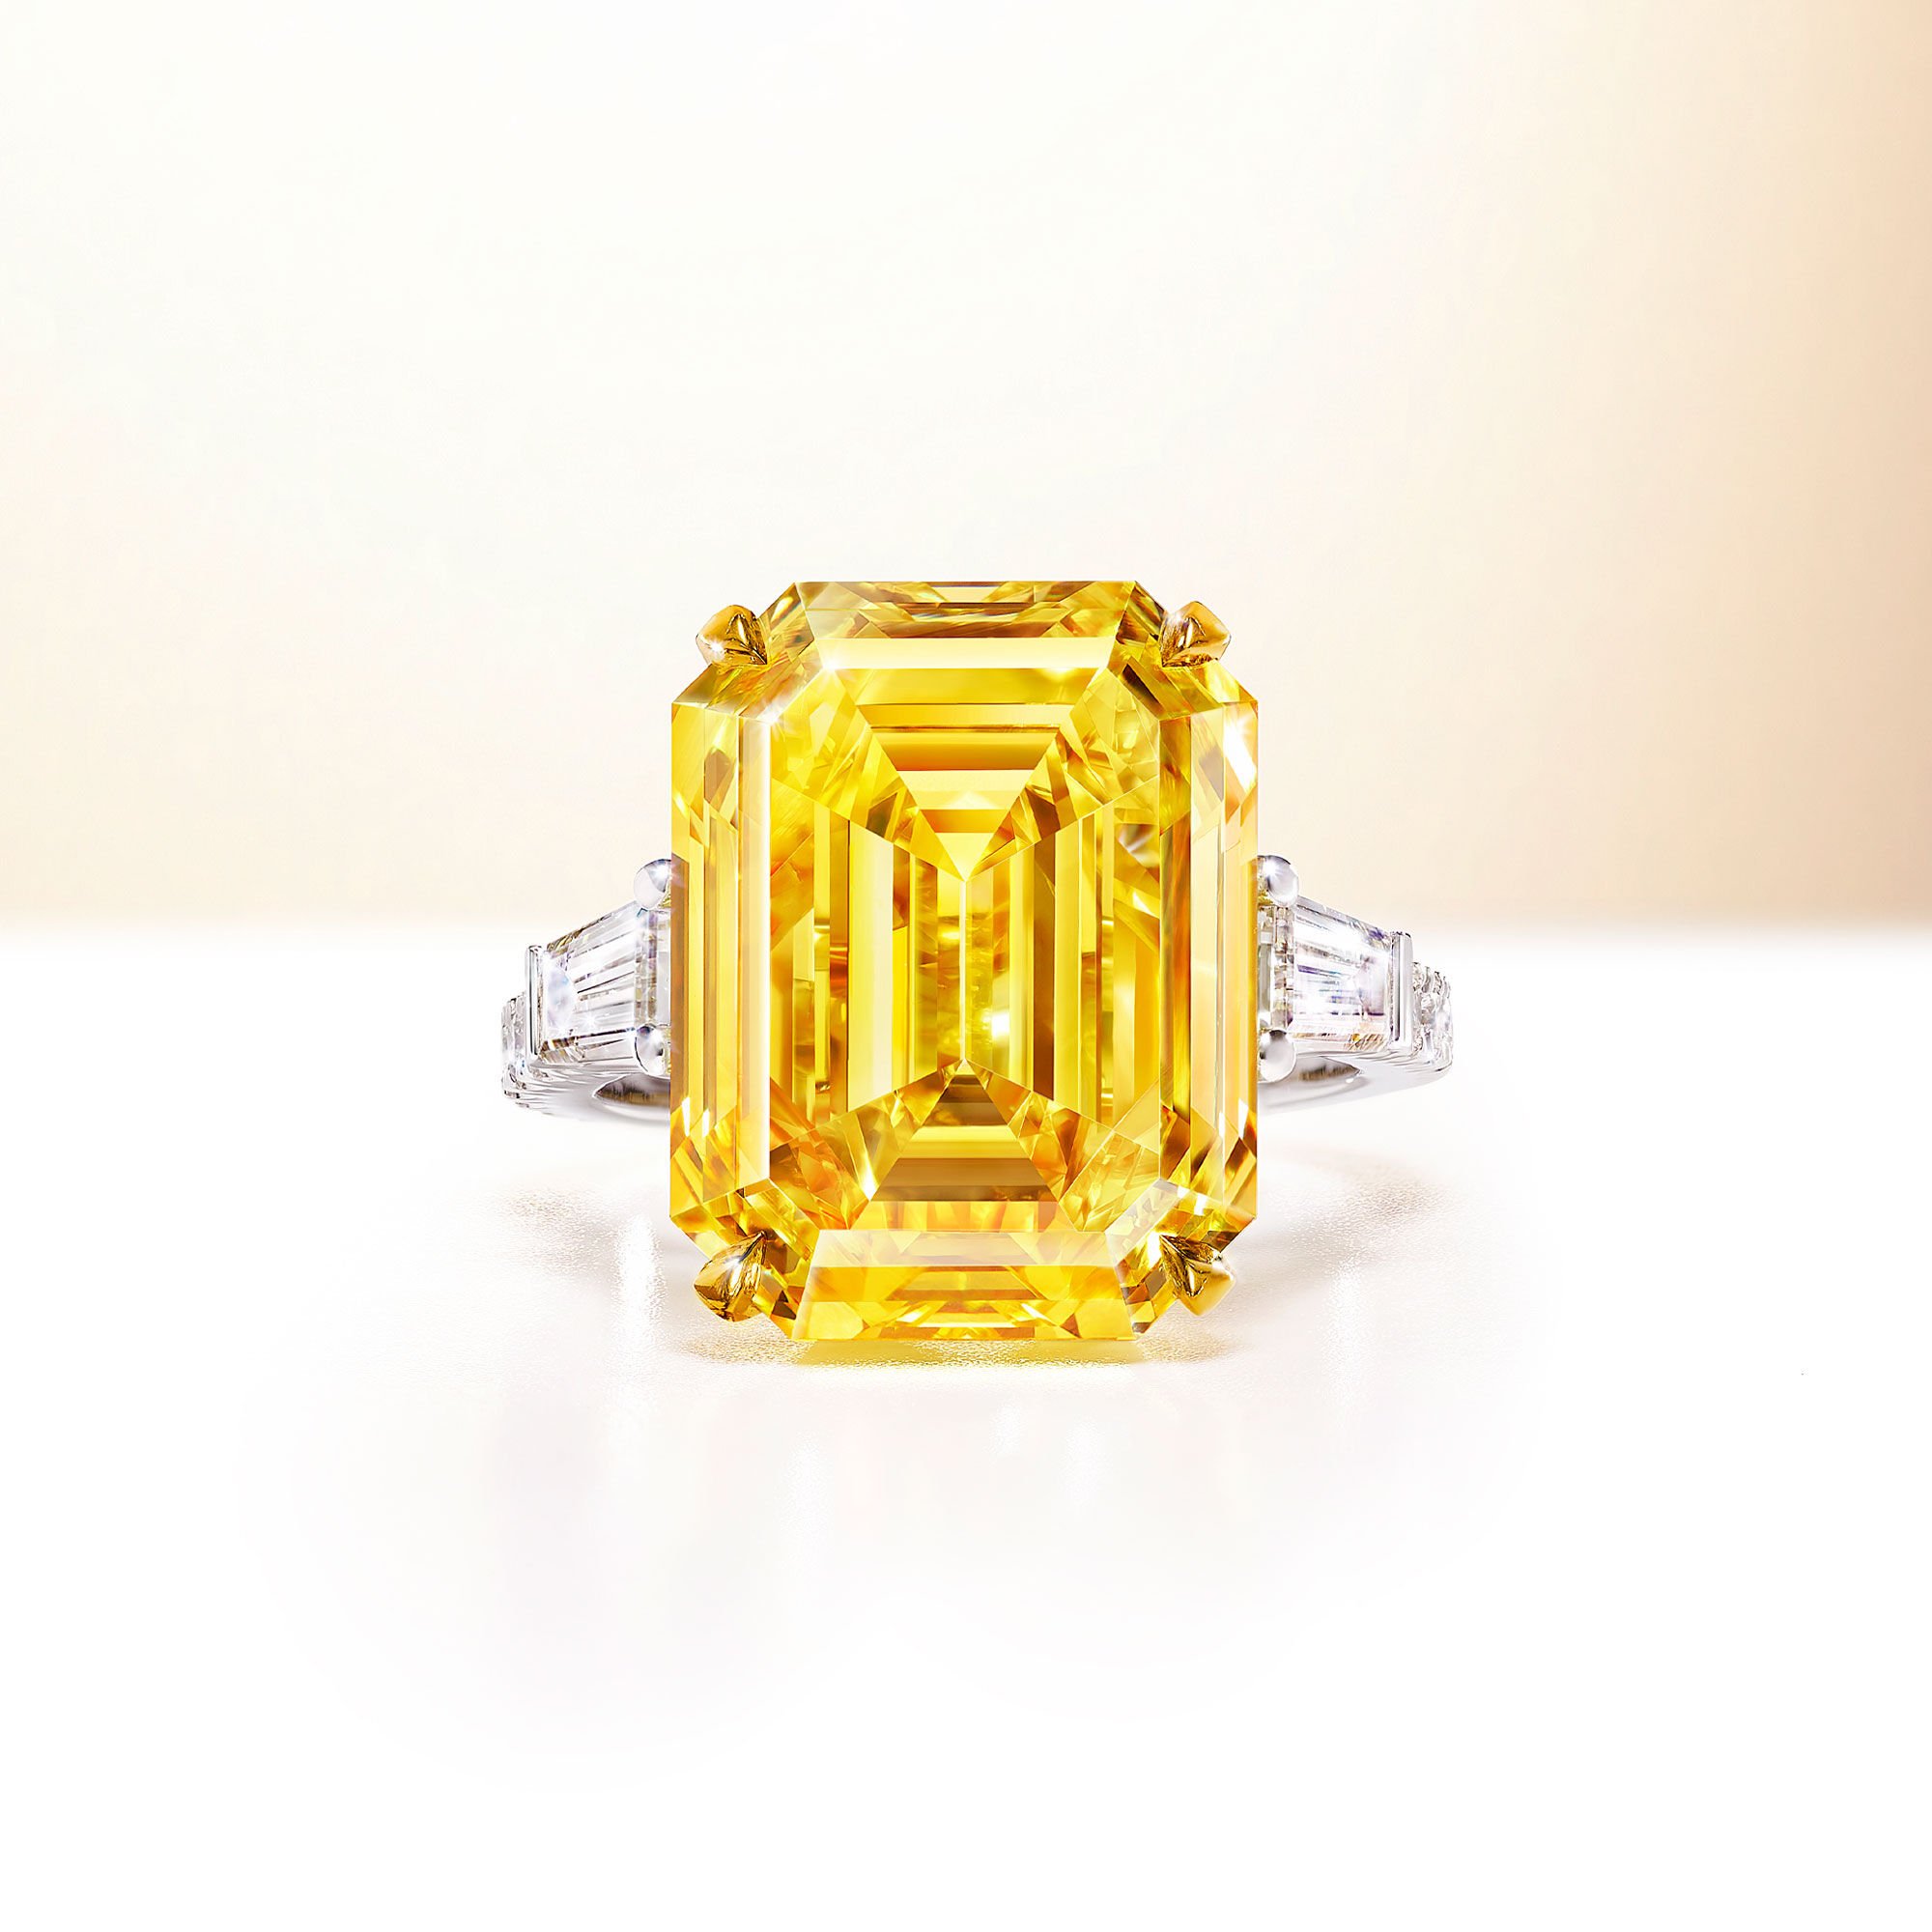 An emerald cut yellow and white diamond ring by Graff